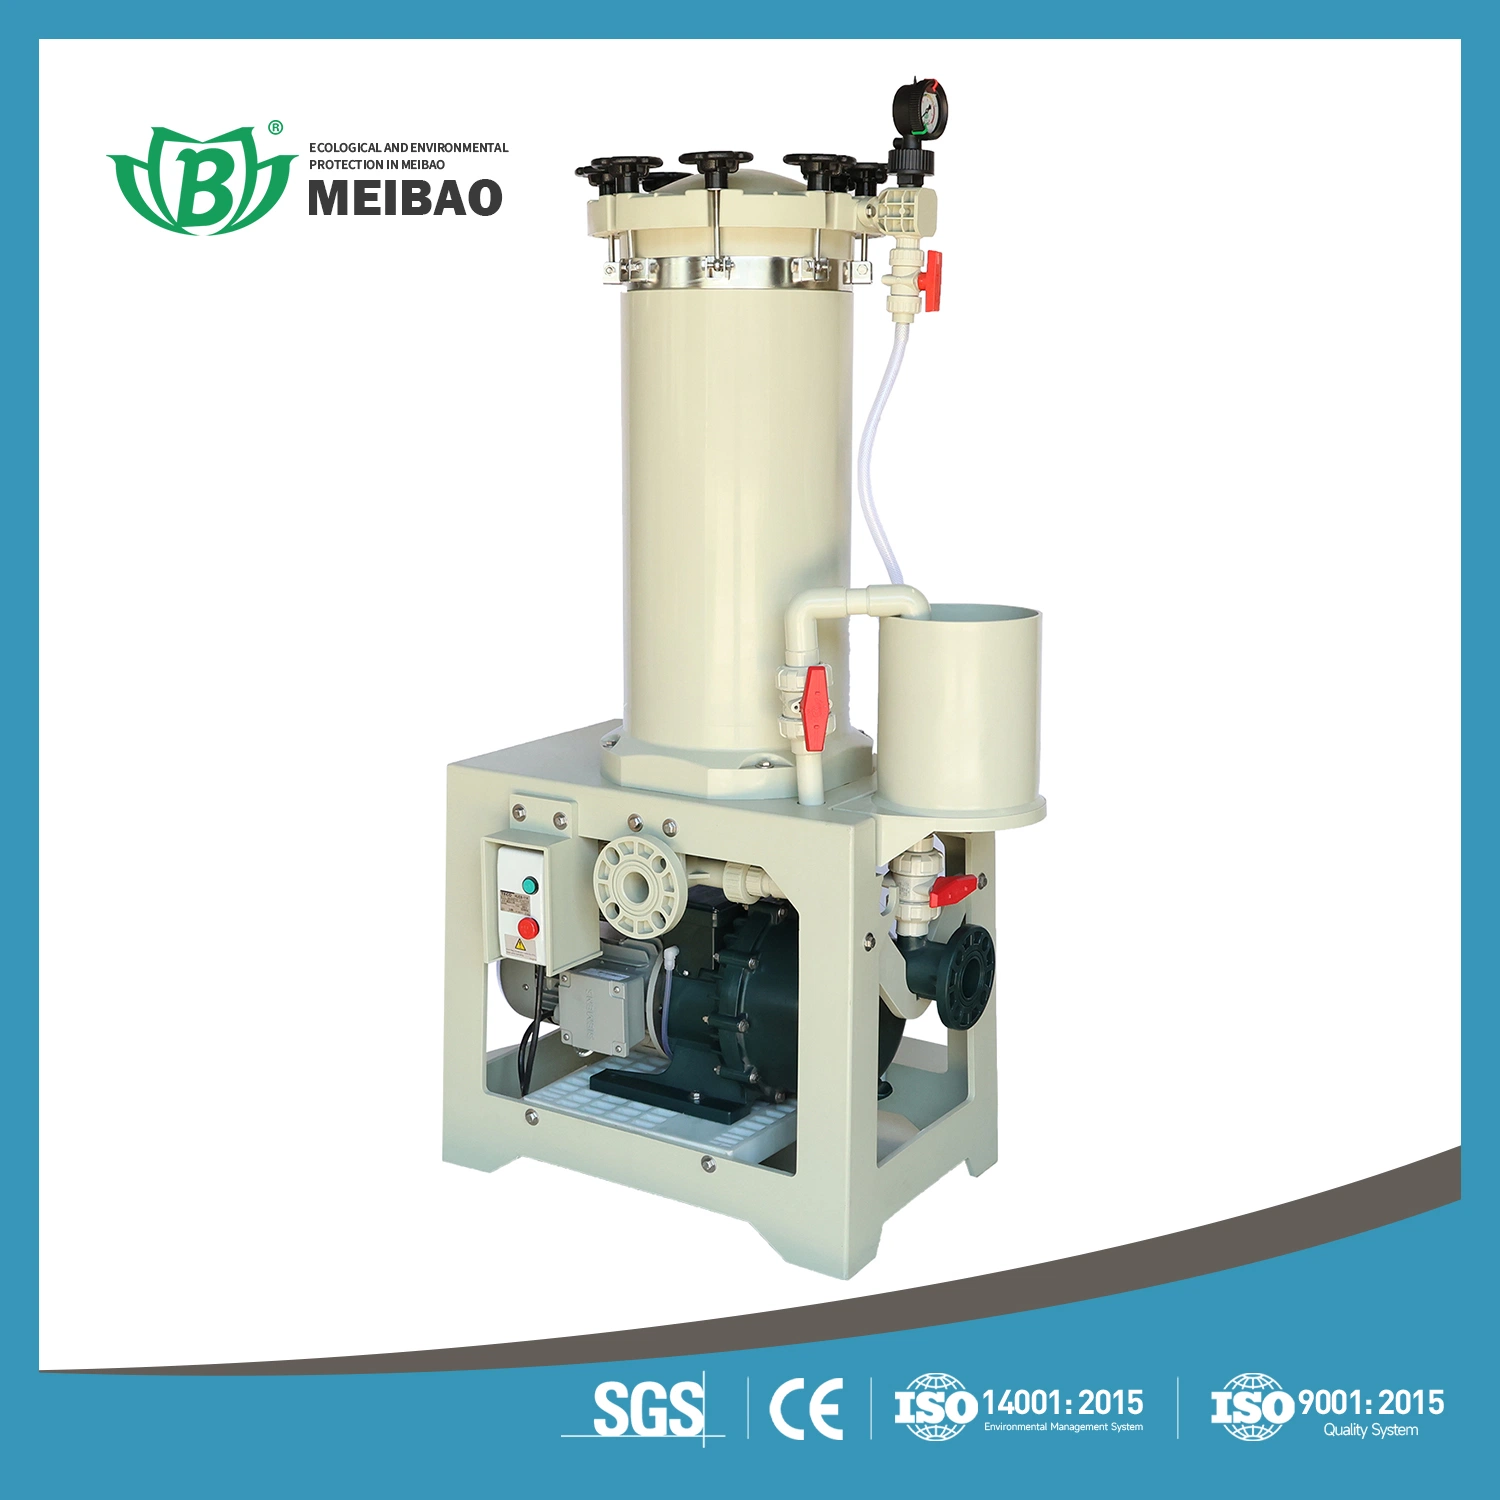 Environmental Protection Industry Acid Alkali Filter Liquid Filtration Machine with Pump